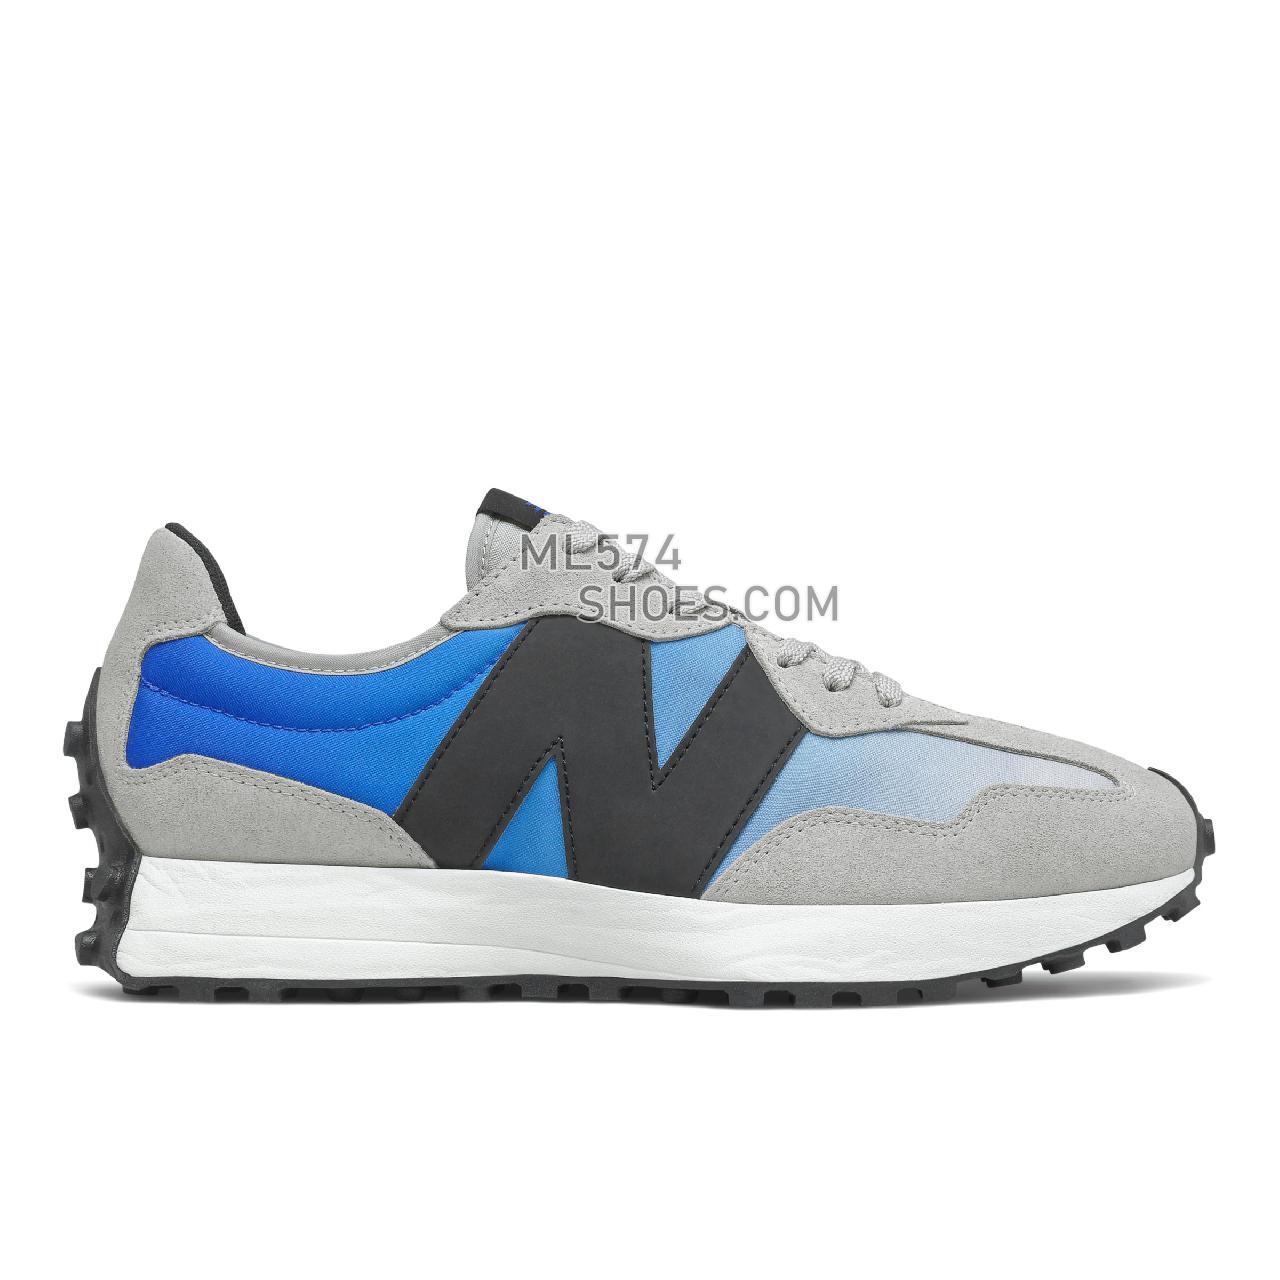 New Balance 327 - Men's Sport Style Sneakers - Cobalt with Light Aluminum - MS327SD